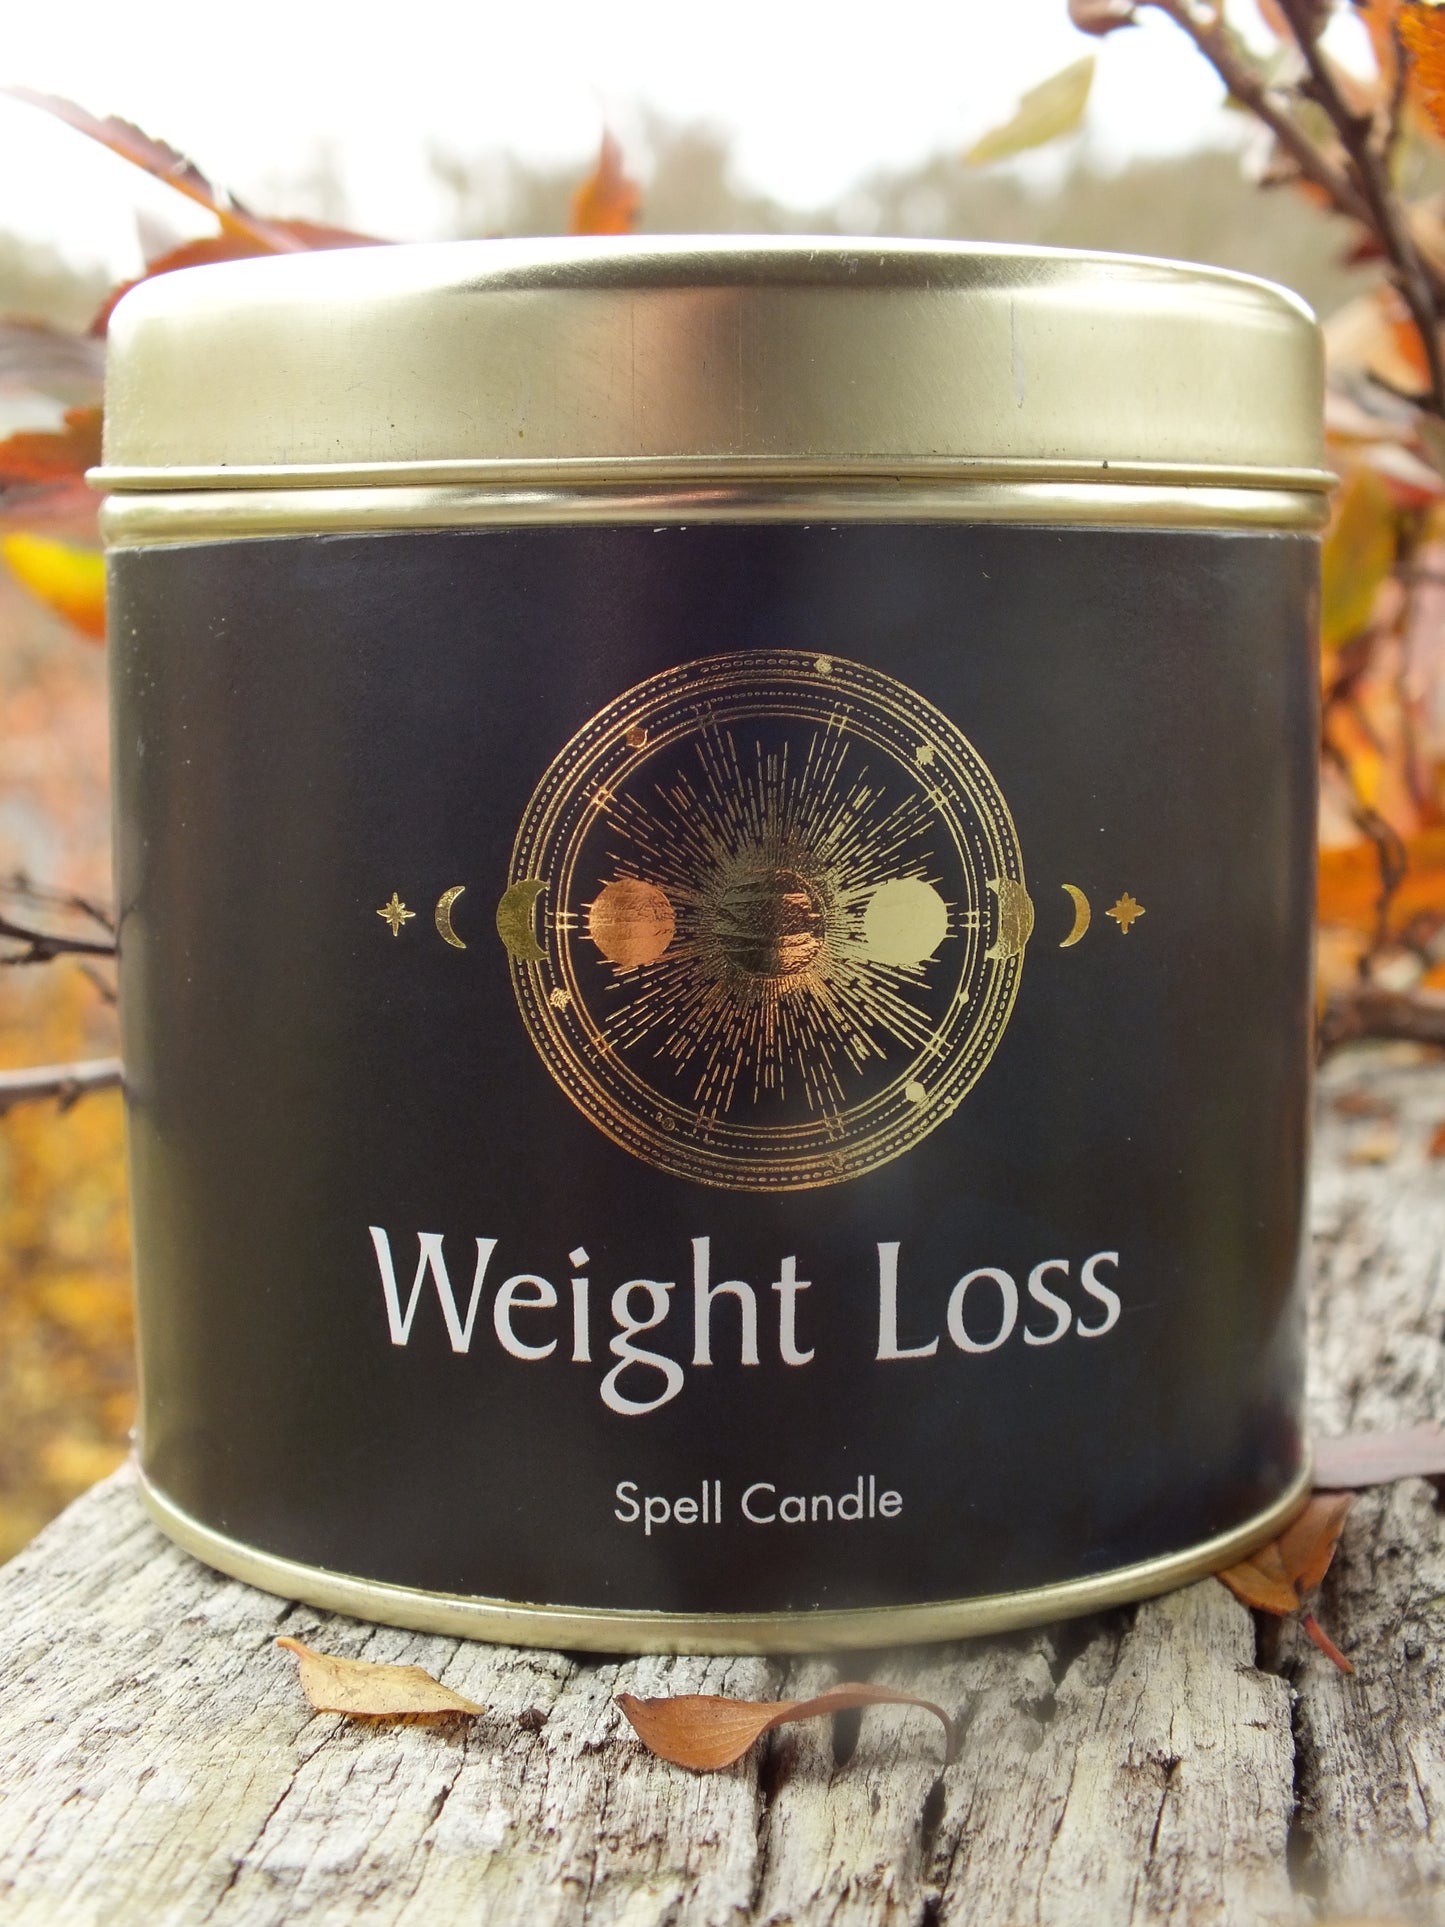 Magic Spell Candle - Weight Loss